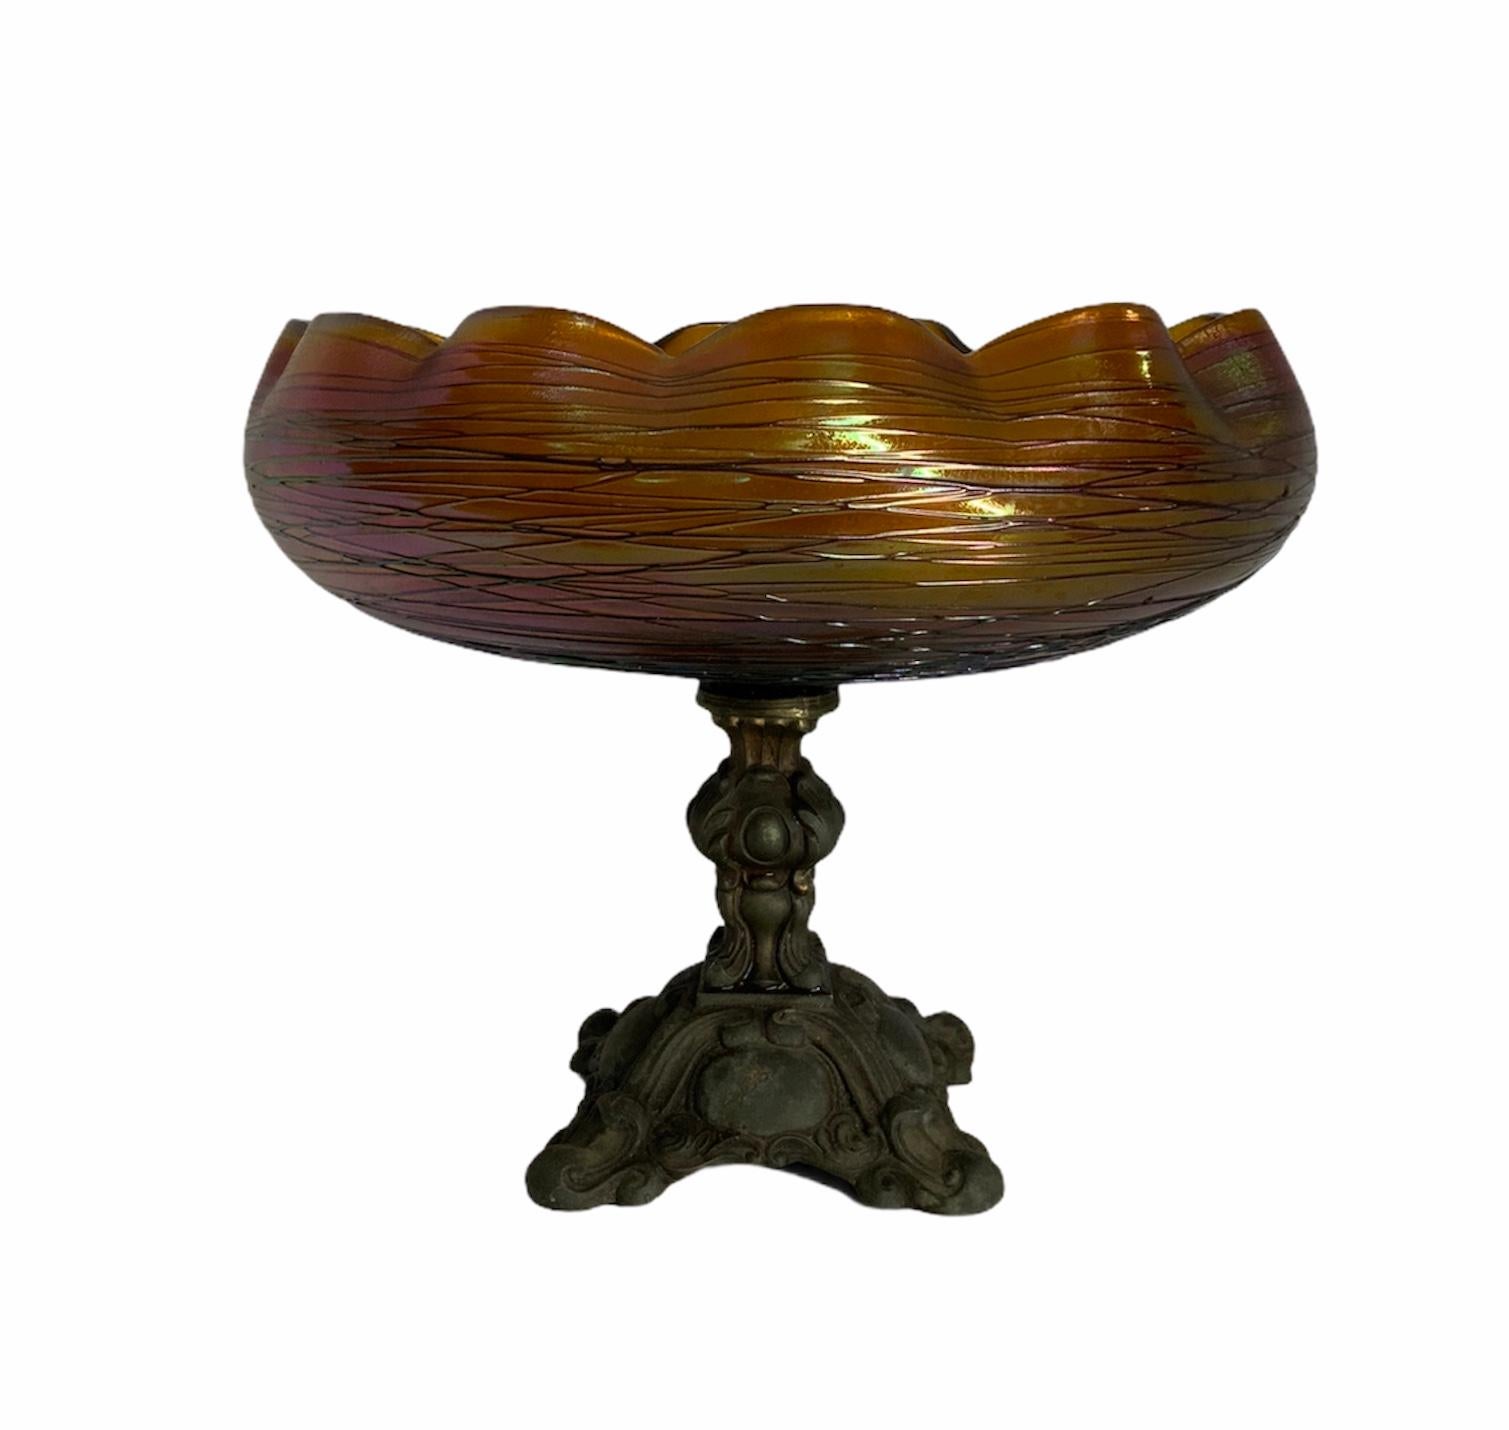 This is a threaded iridescent gold yellow-orange glass scalloped rim bronze compote/vase. The bronze pedestal is carved and shaped as a wide column ending as a quatrefoil. It is adorned with acanthus leaves and scrolls. Inside the bowl, there is an